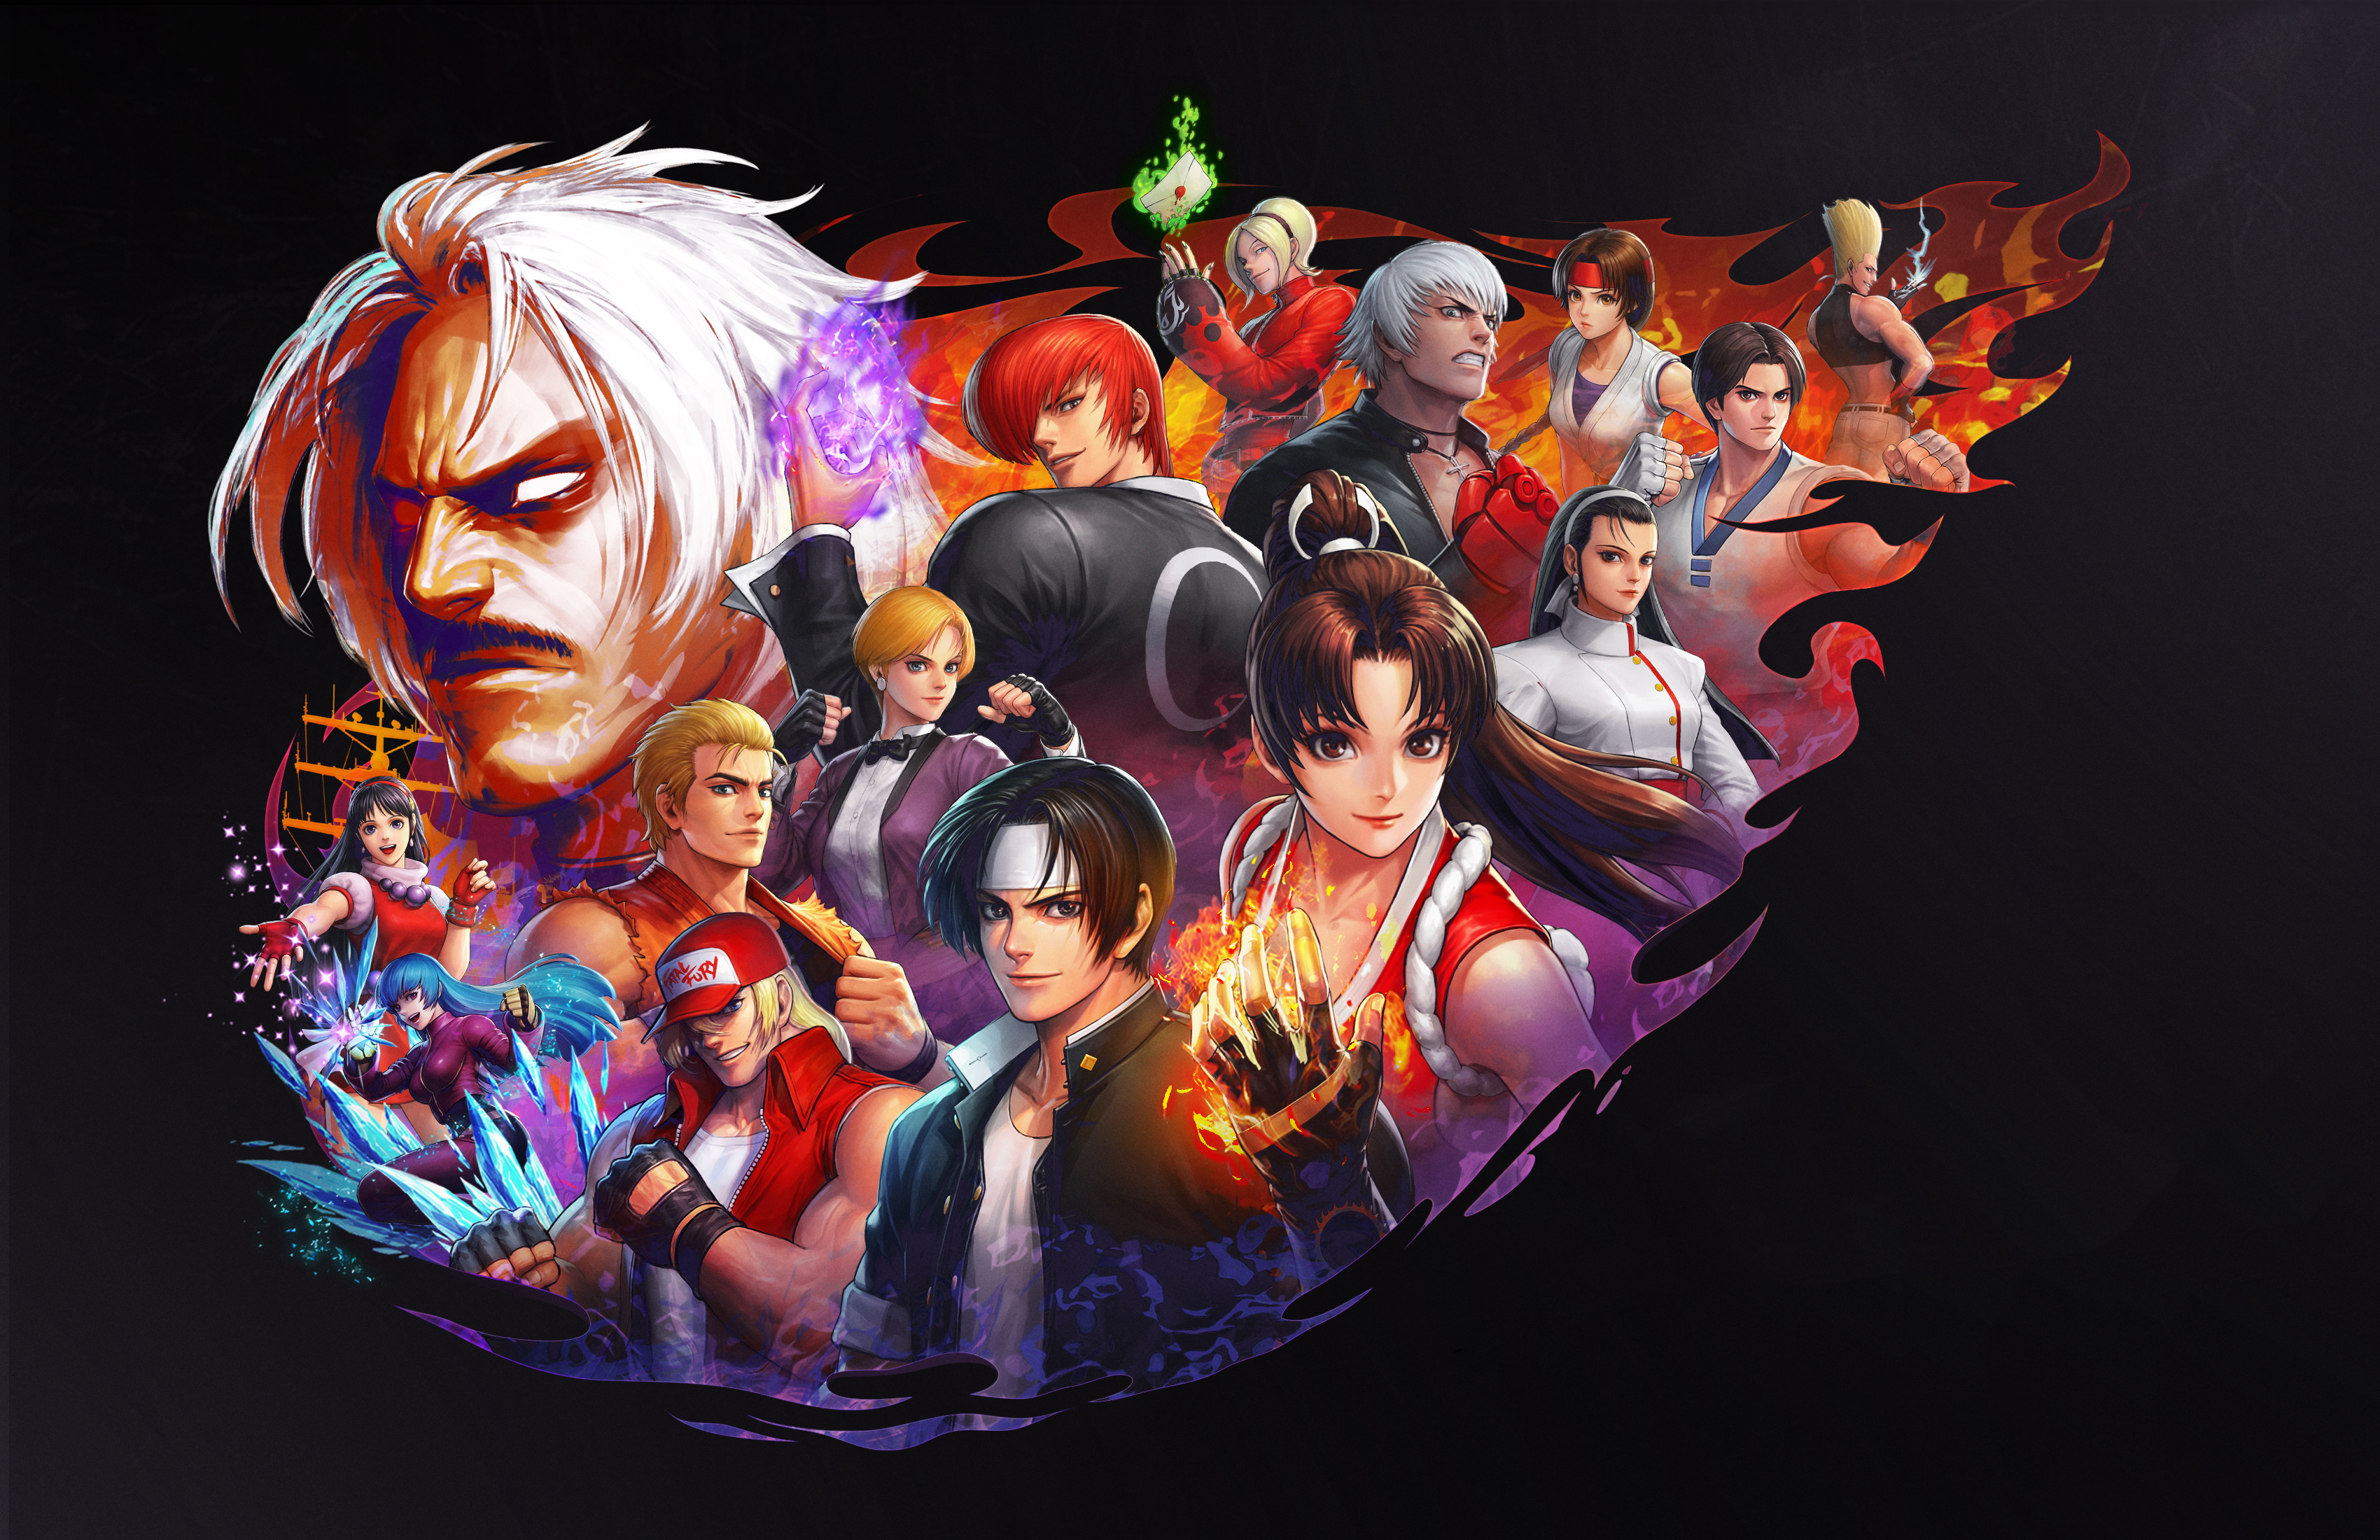 The King Of Fighters Wallpaper, HD Games 4K Wallpapers ...